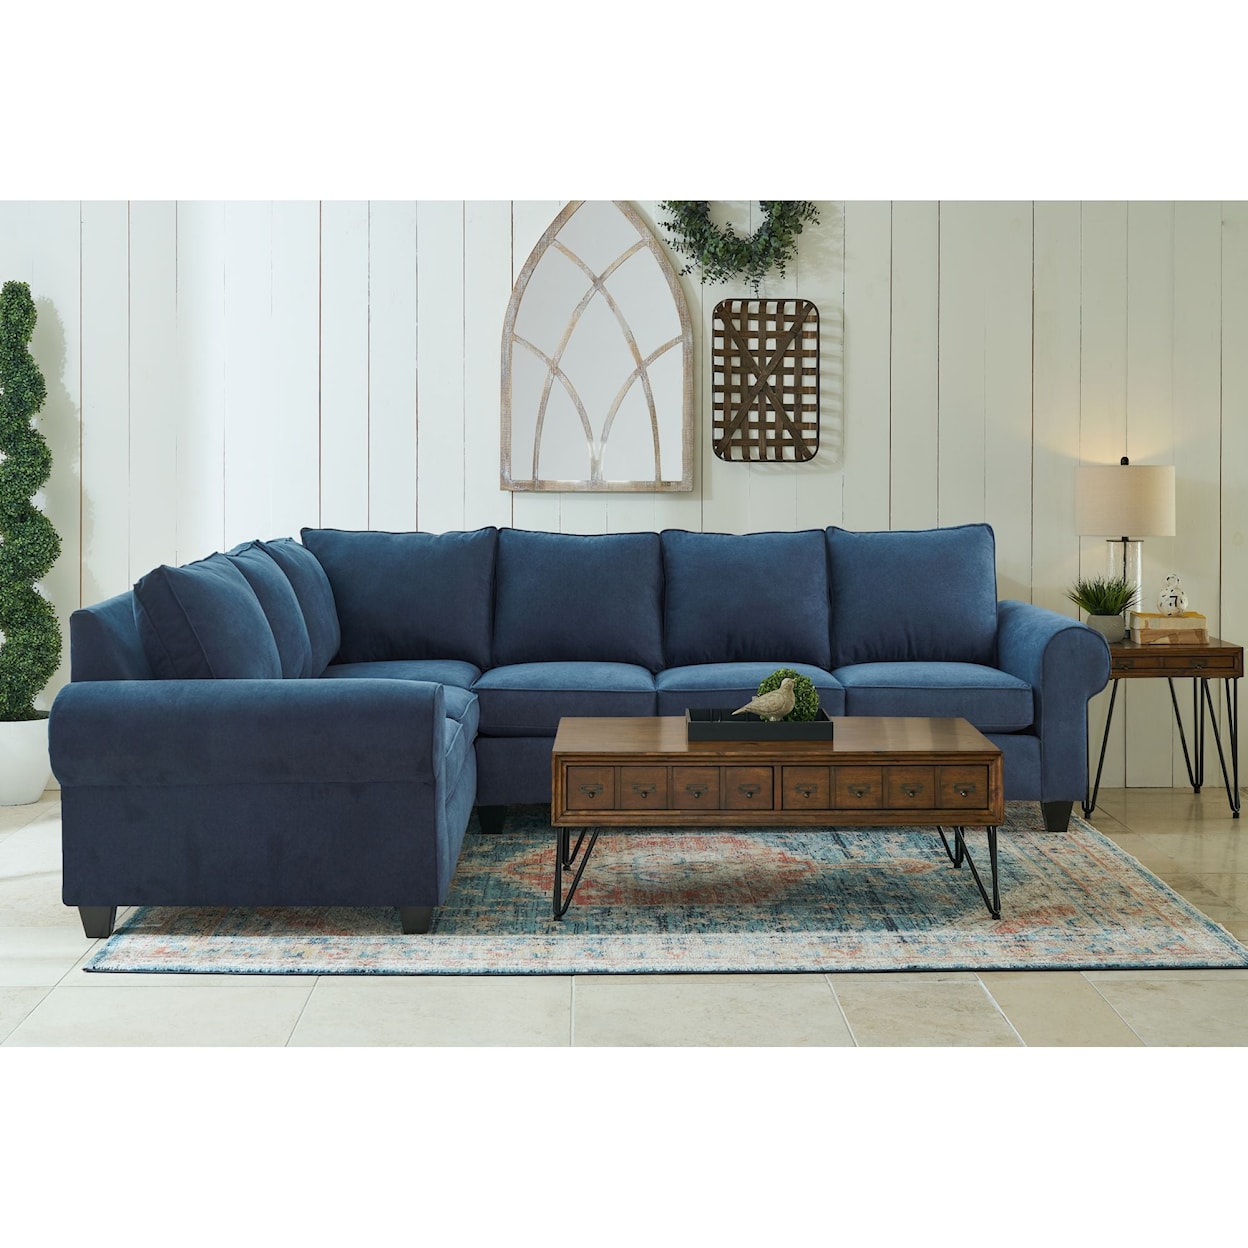 Elements 705 Sectional Sofa Set with Reversiable Cushions